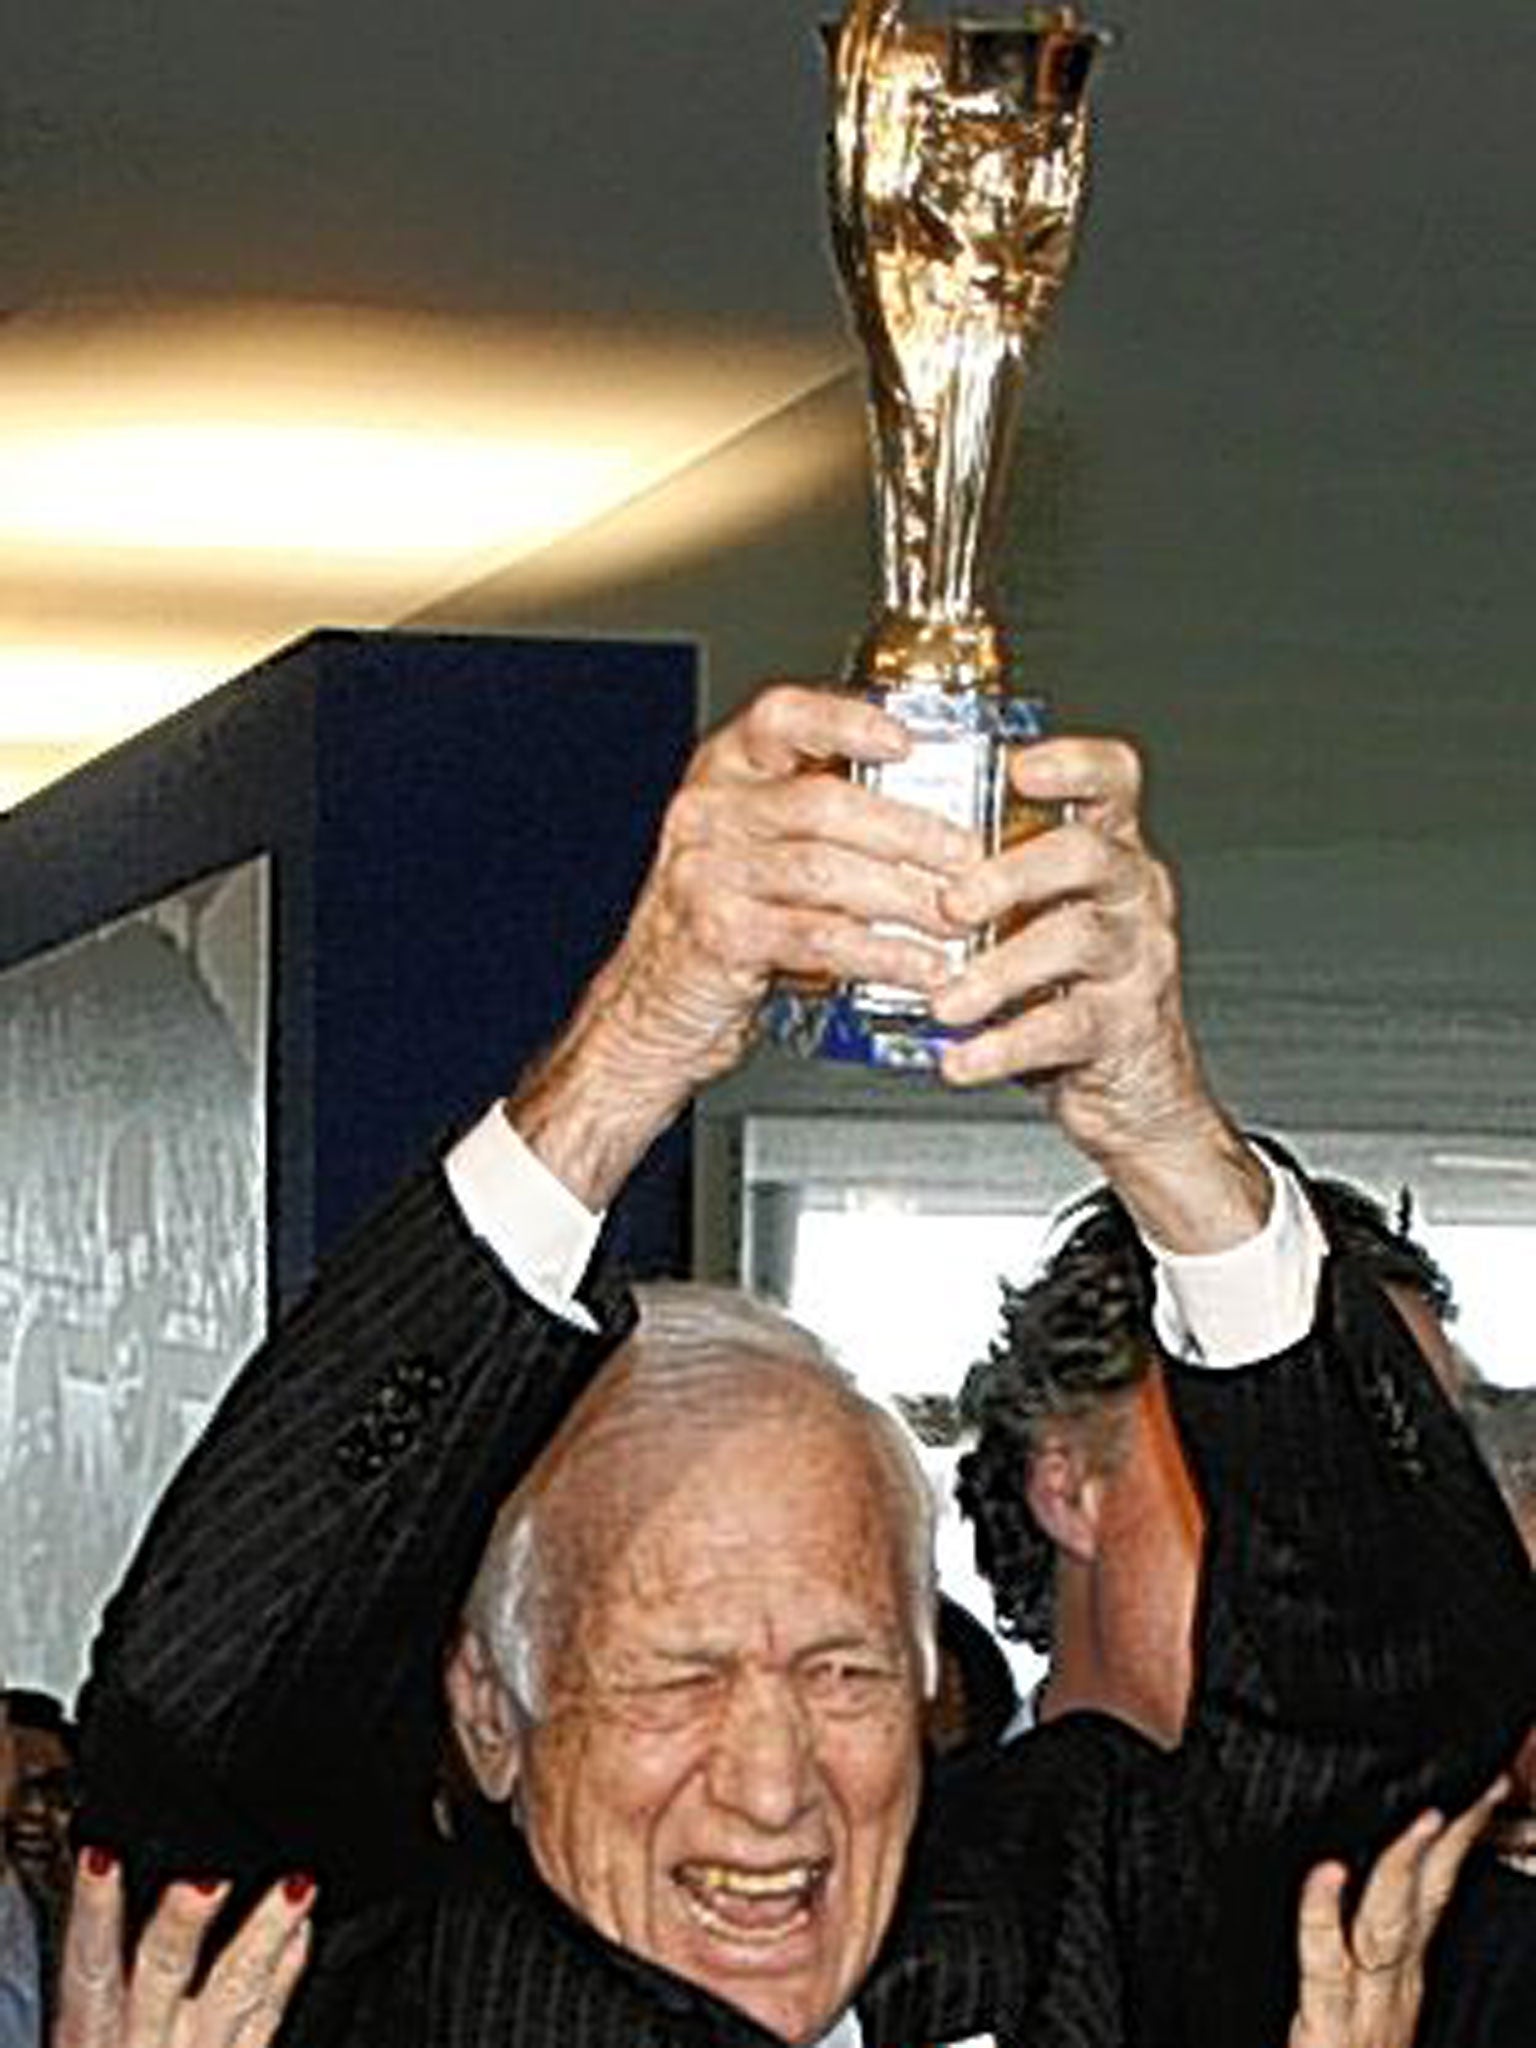 Bellini lifts a replica of the Jules Rimet trophy in a recreation of the seminal image from 1958